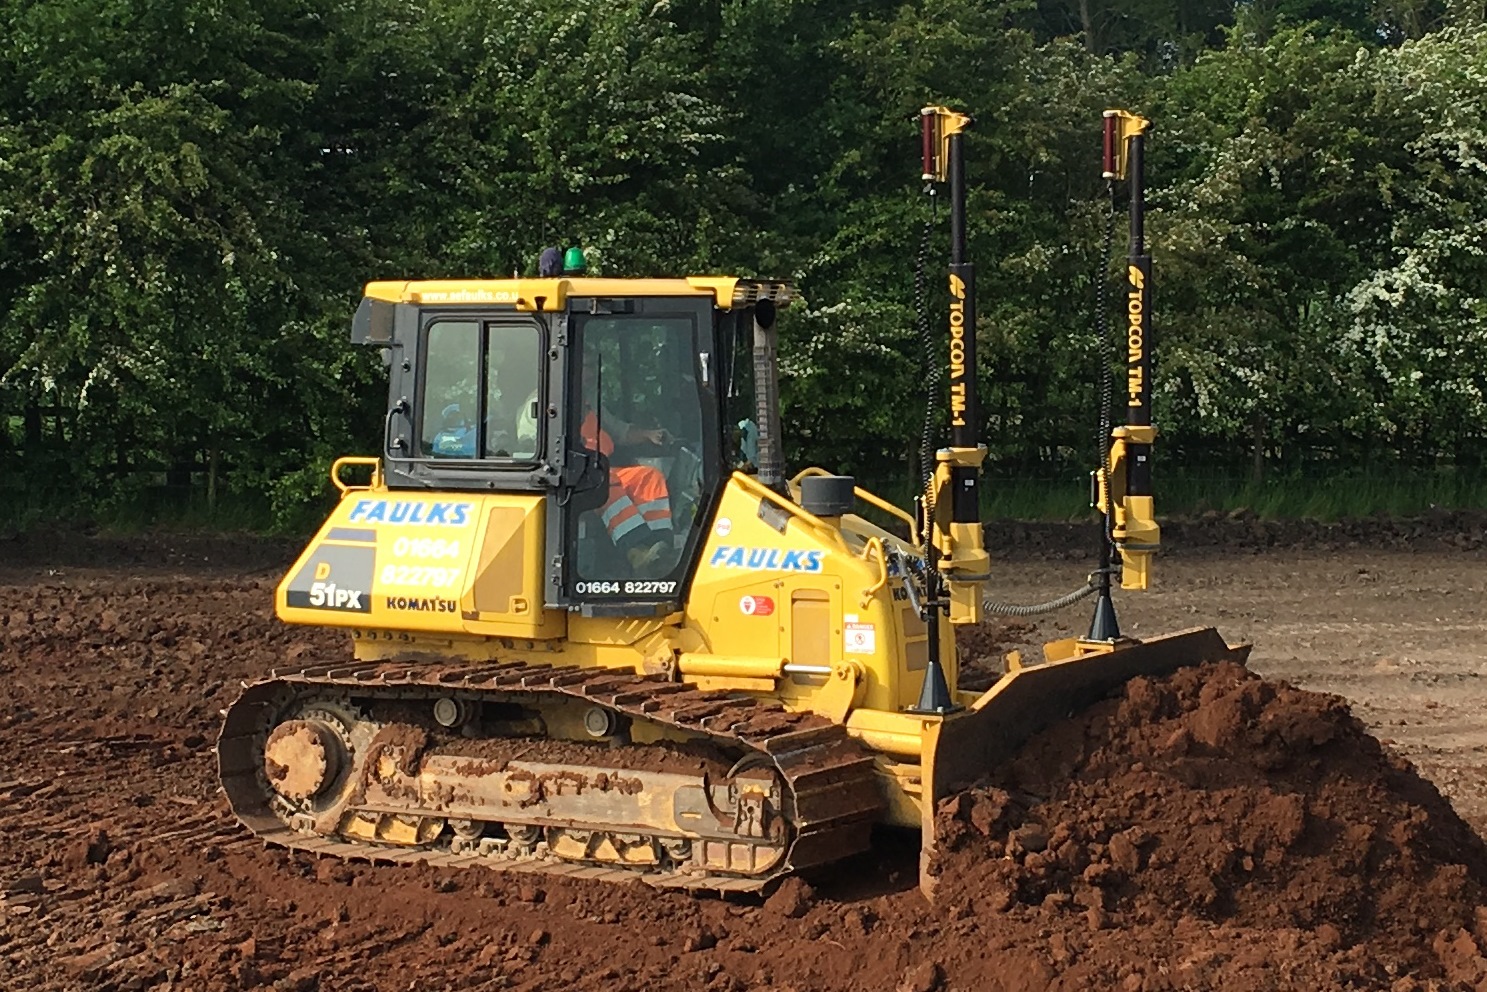 The D51 Dozer available to hire from AE Faulks in use on construction site.